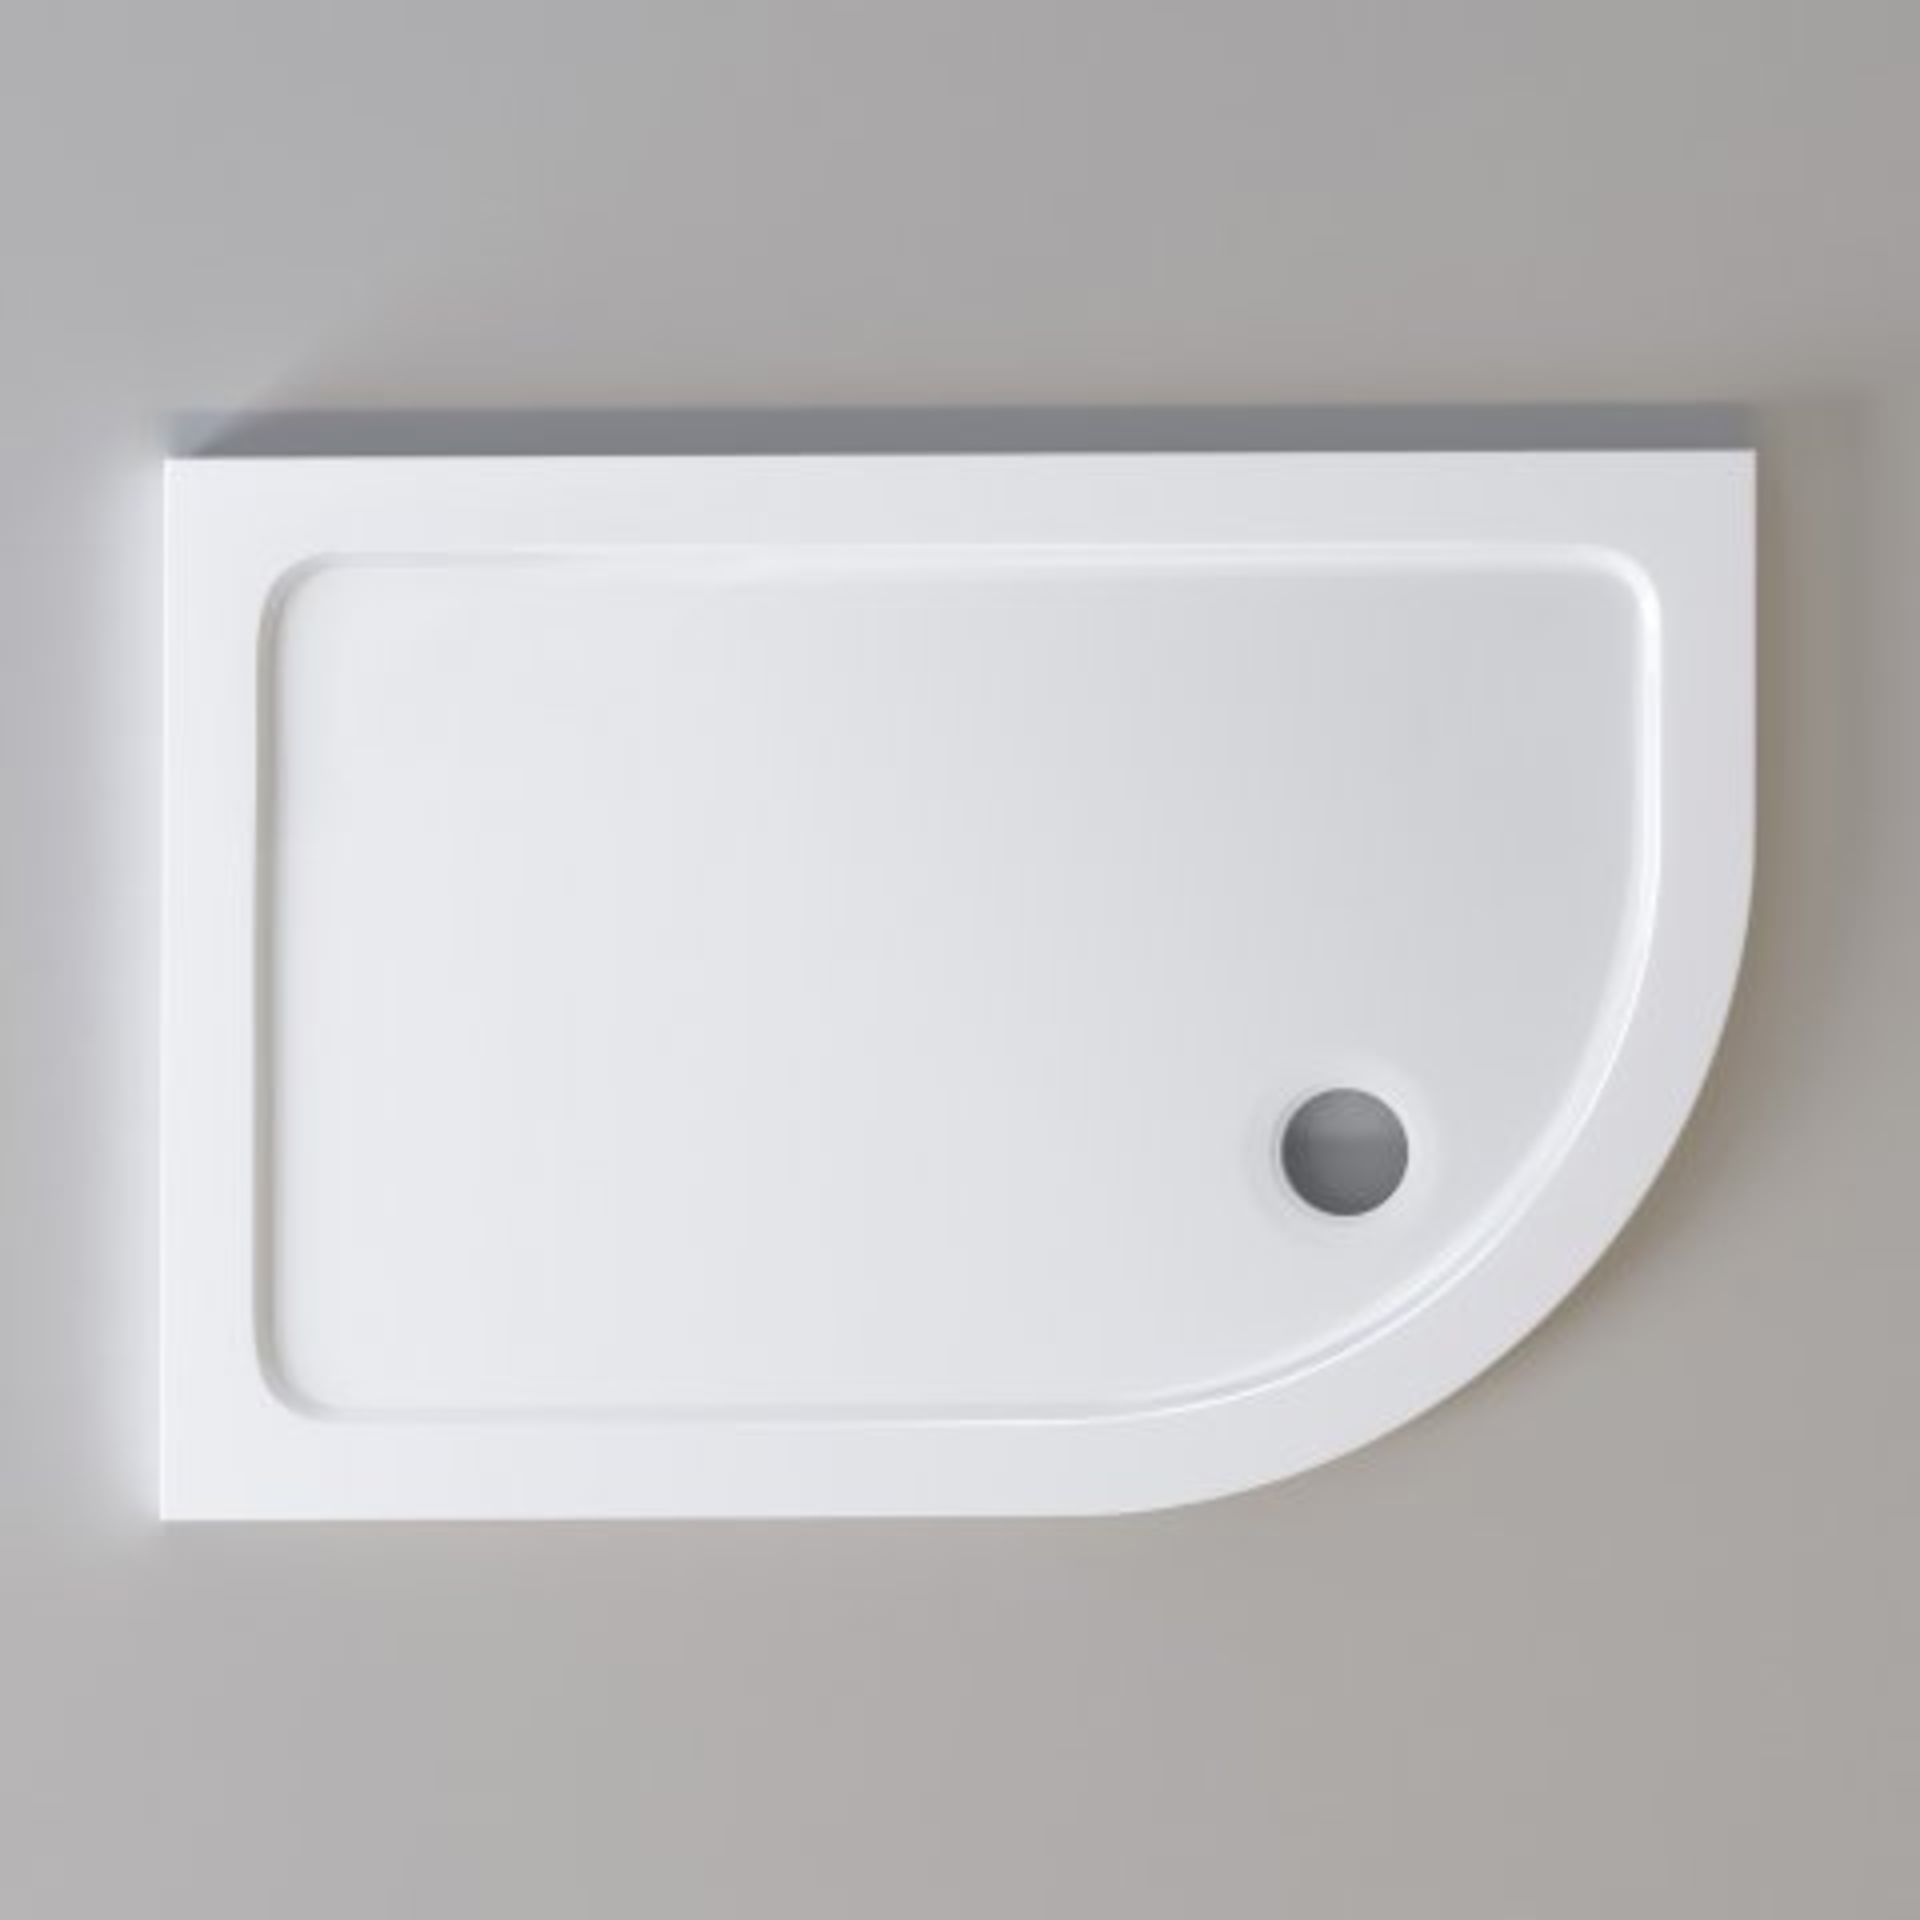 (T47) 1200x800mm Offset Quadrant Ultraslim Stone Shower Tray - Right. RRP £299.99. Magnificently - Image 2 of 2